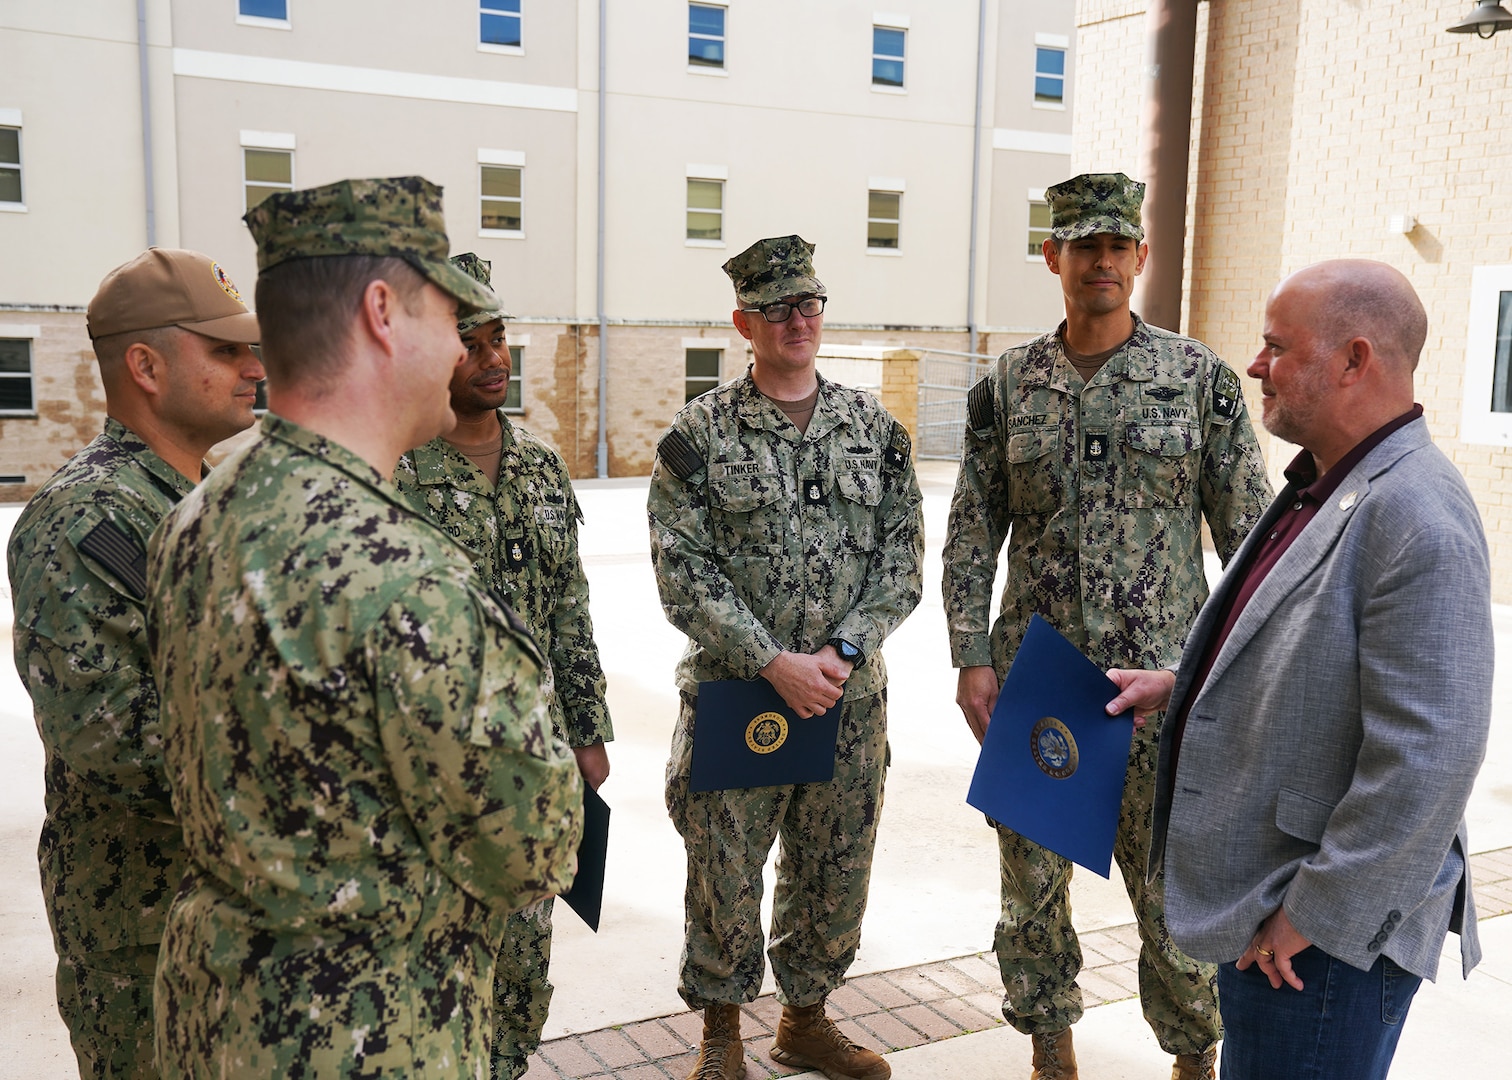 U.S. Congressman recognizes Navy Chiefs for taking care of one of their ...